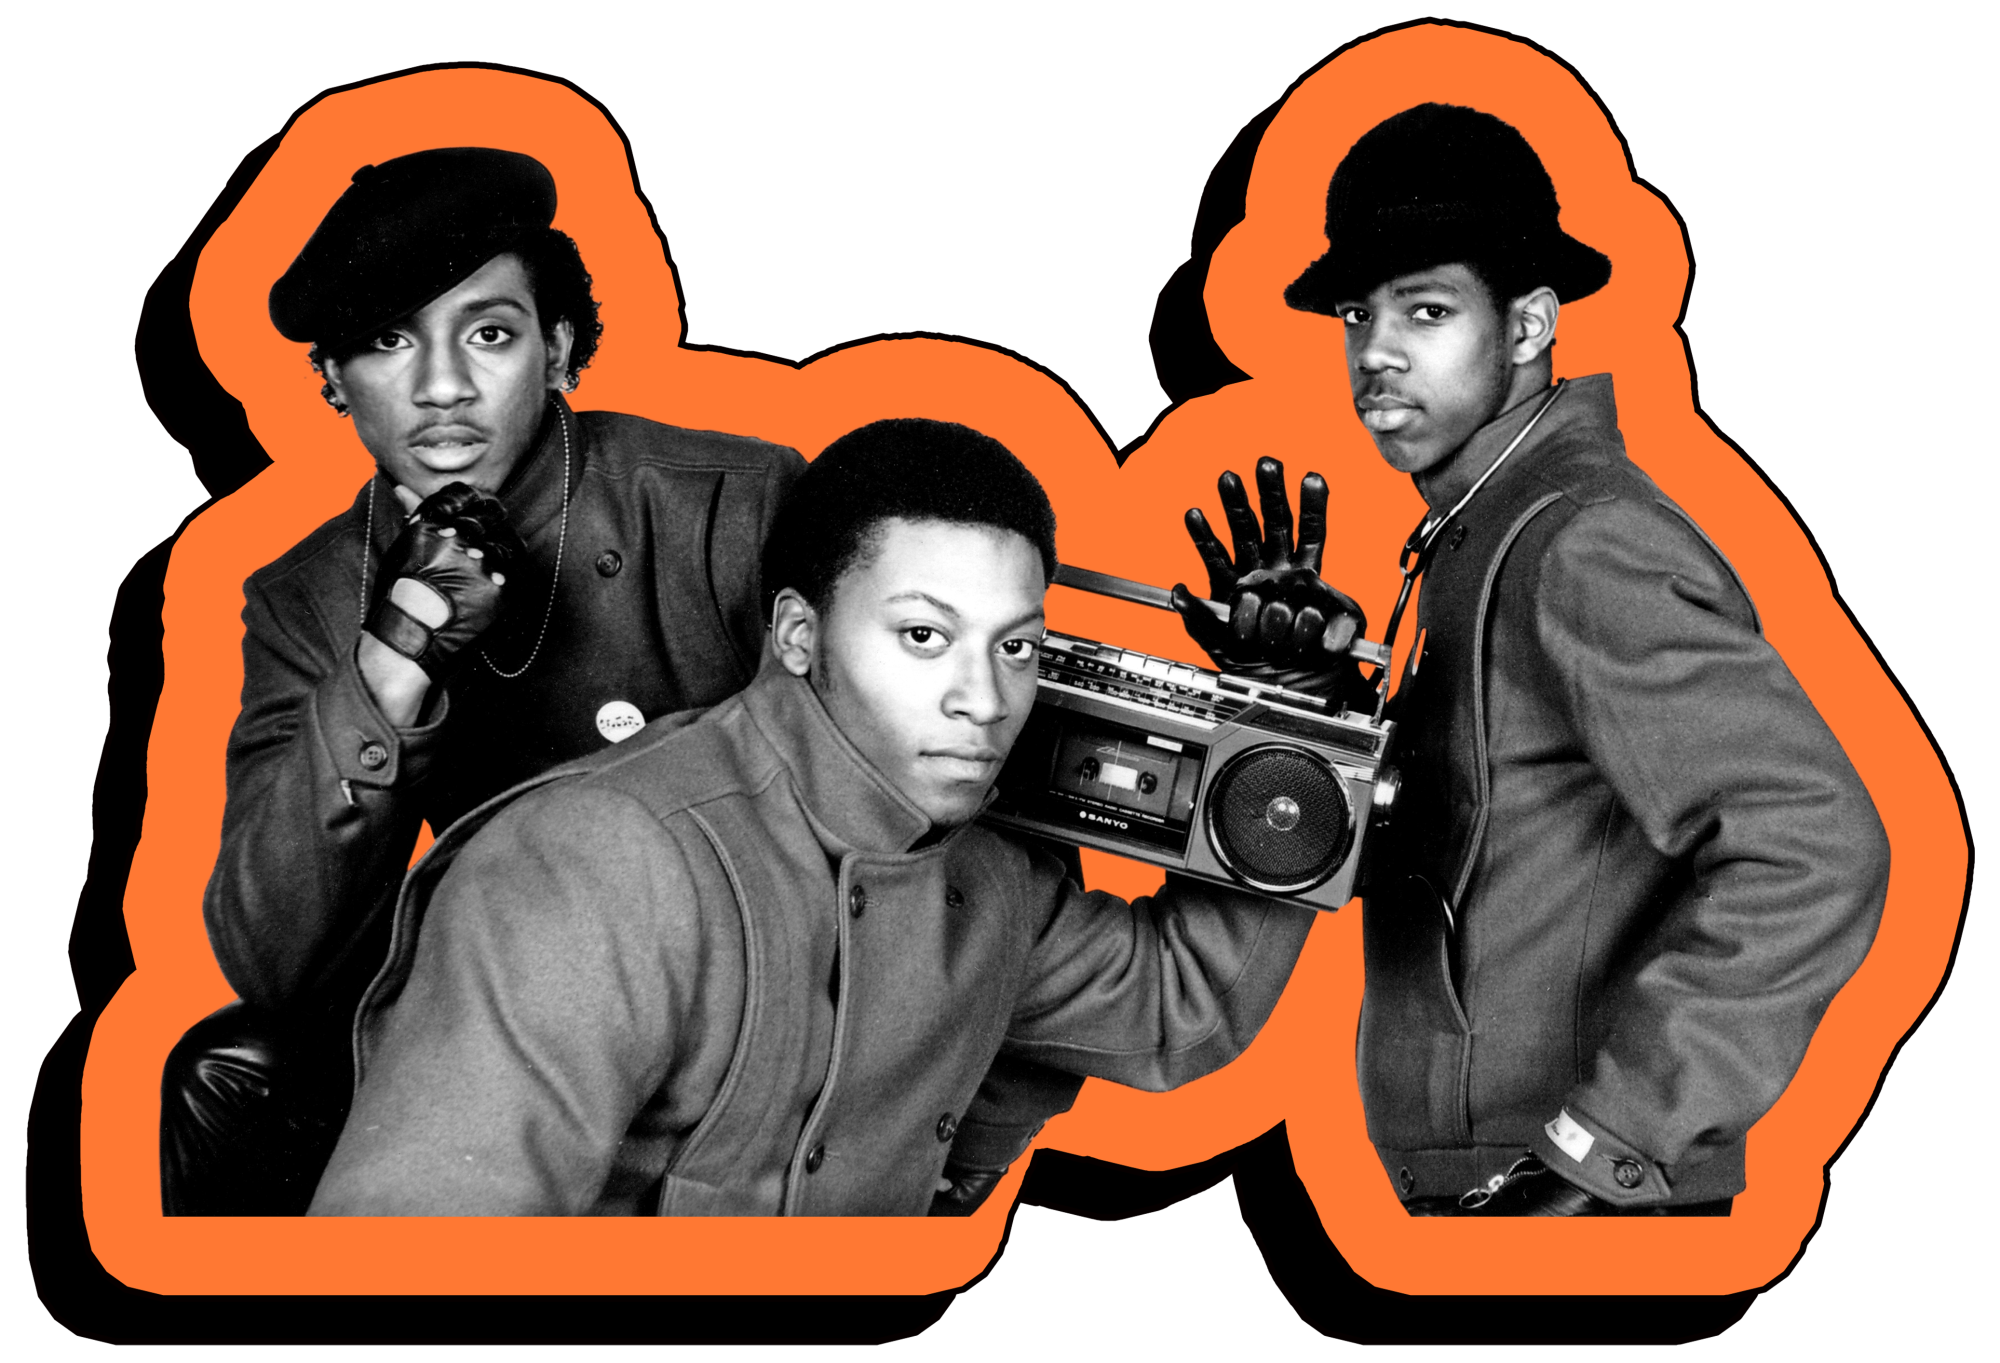 GRANDMASTER FLASH & THE FURIOUS FIVE - the message – Northwest Grooves